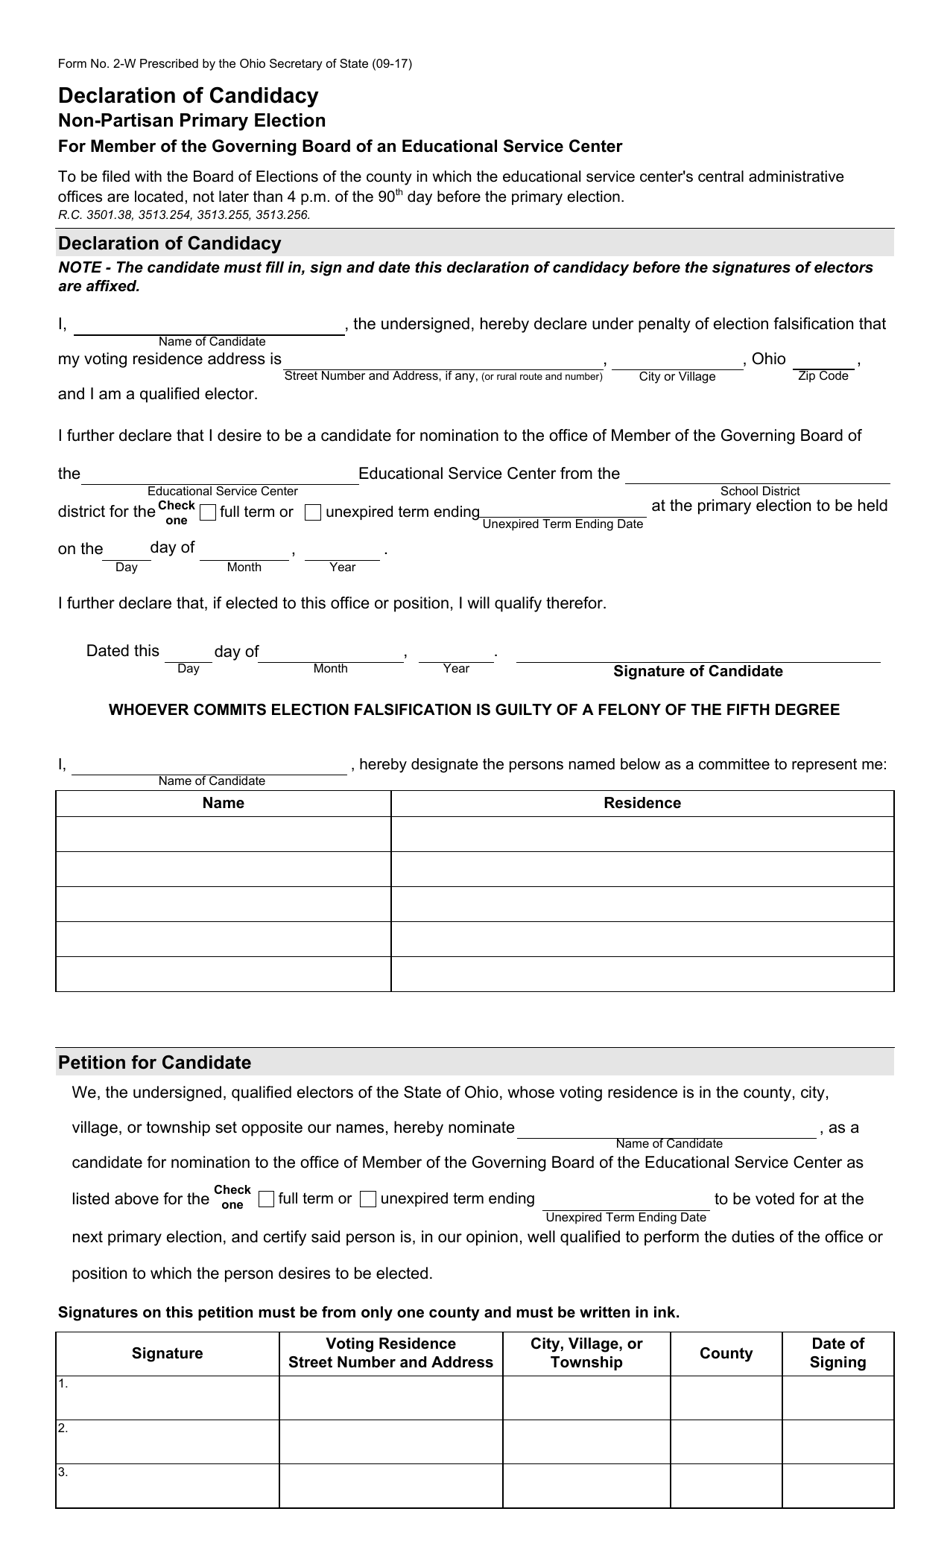 Form 2-W Declaration of Candidacy for Member of the Governing Board of an Educational Service Center - Non-partisan Primary Election - Ohio, Page 1